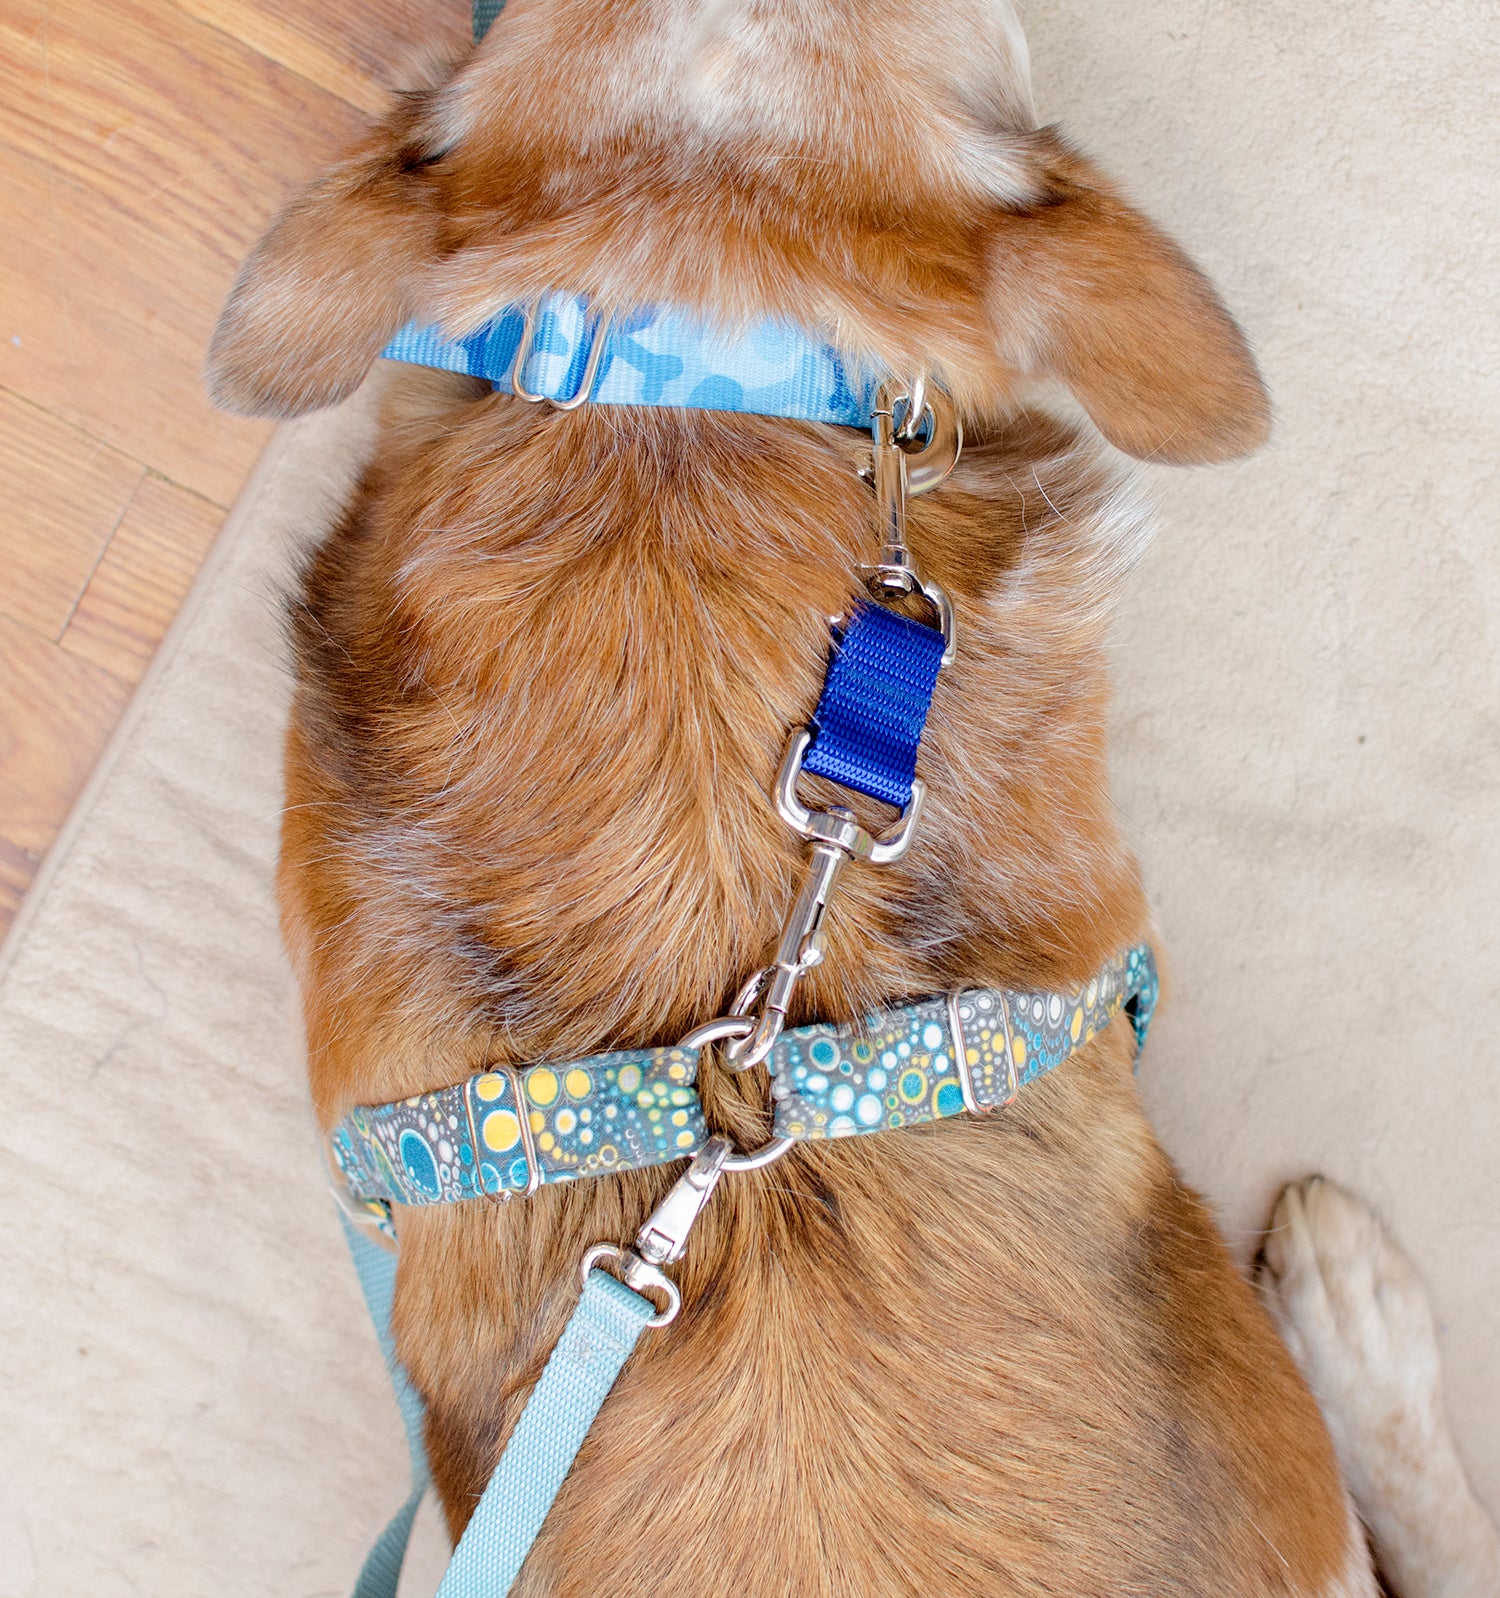 Dog Collar Or Dog Harness: What Does Your Dog Need?